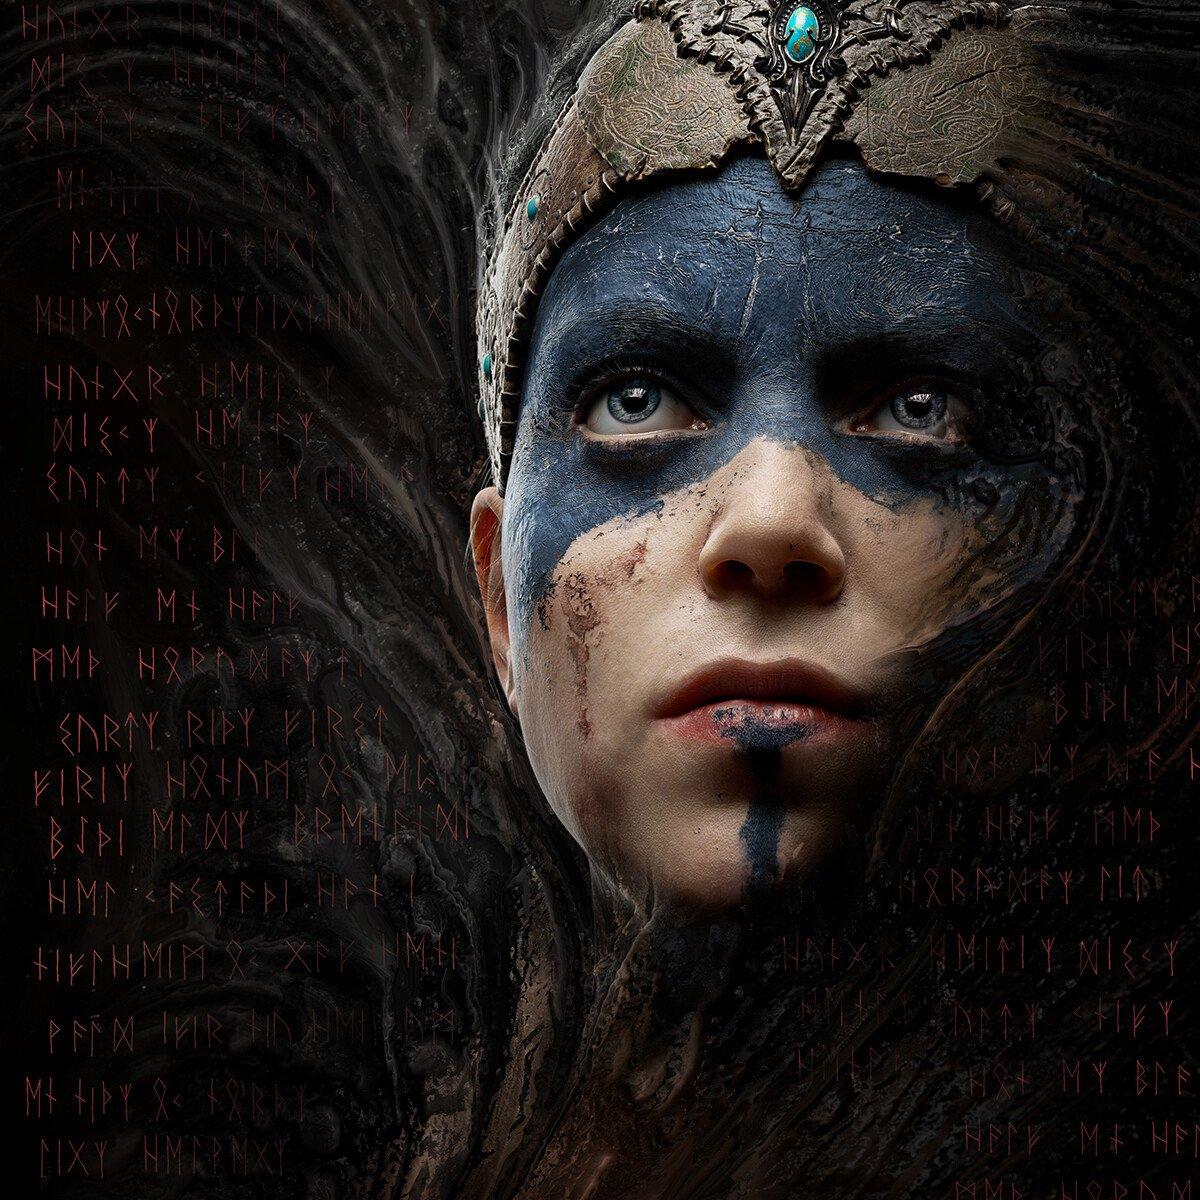 Image of Senua, the main protagonist in Hellblade